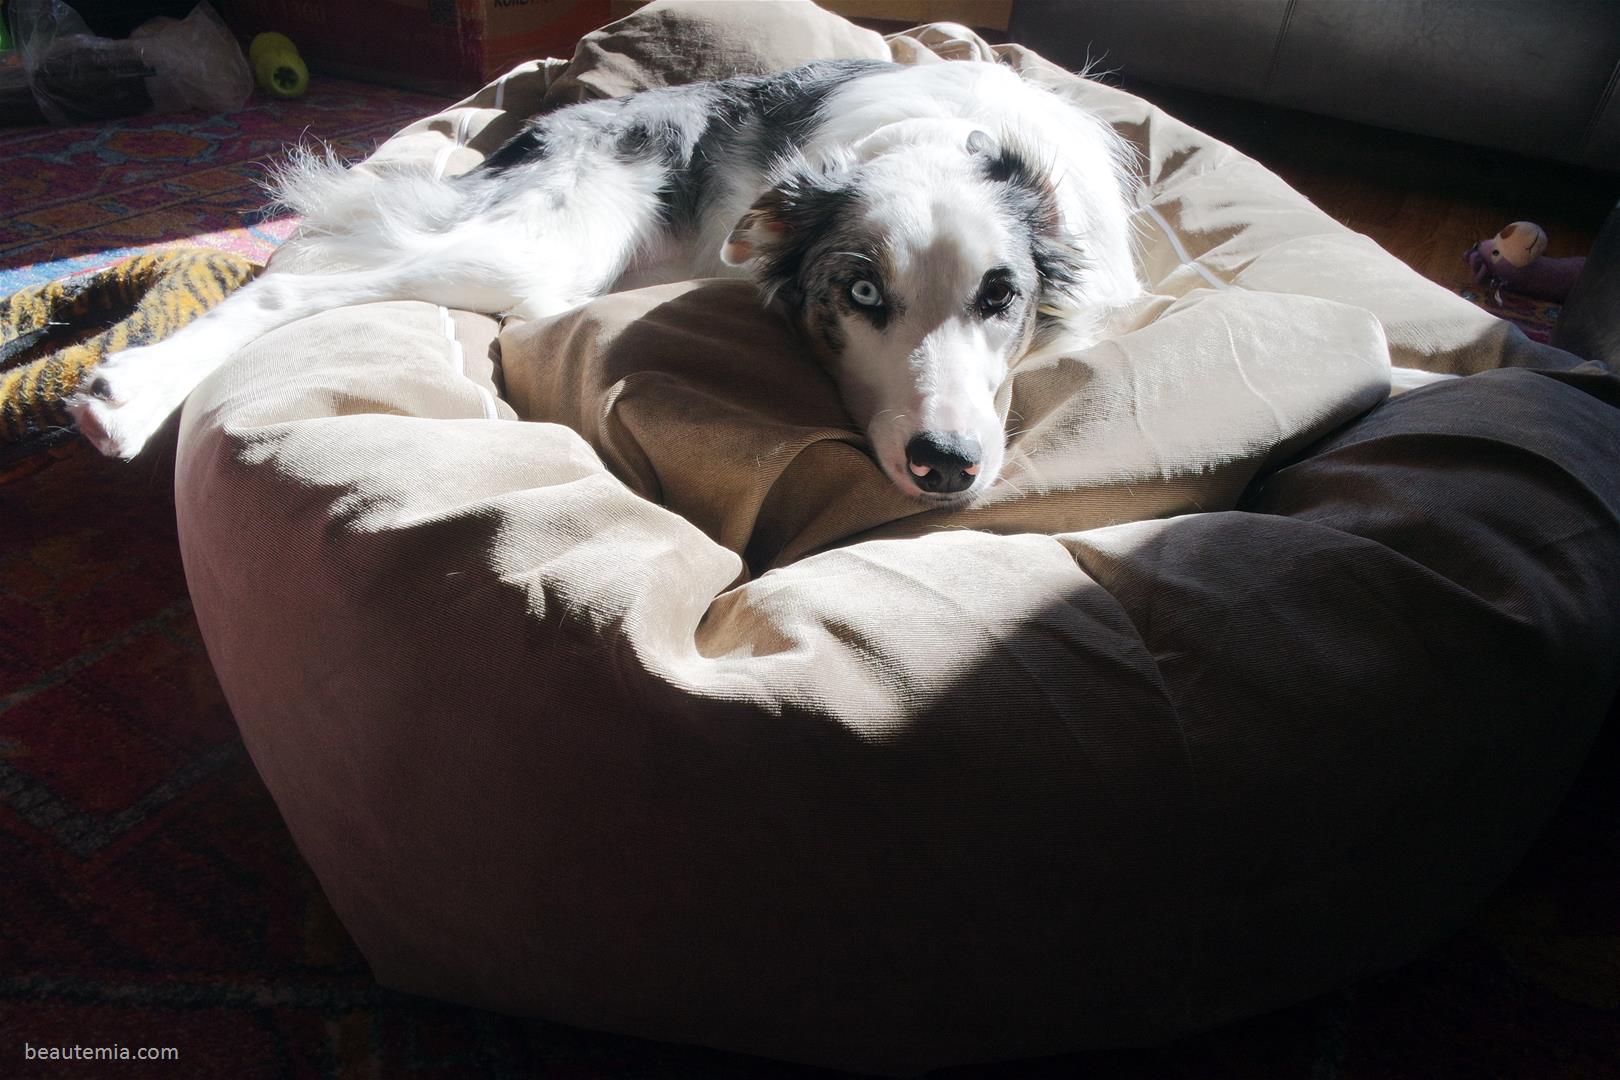 Majestic Pet dog bed, Majestic Pet bagel dog bed, best dog bed, best pet bed, best dog bed for large dogs, best dog bed for senior dogs, best dog bed for puppies, cute puppies, barkbox, dog subscription boxes, animal shelter in seattle, animal shelter in bellevue, Seattle Humane, border collie, cute puppies, dogs on instagram, swiss perfection spa, clinique de la prairie, Dr Paul Niehans, Miranda Kerr skincare & Final Fantasy Yuna